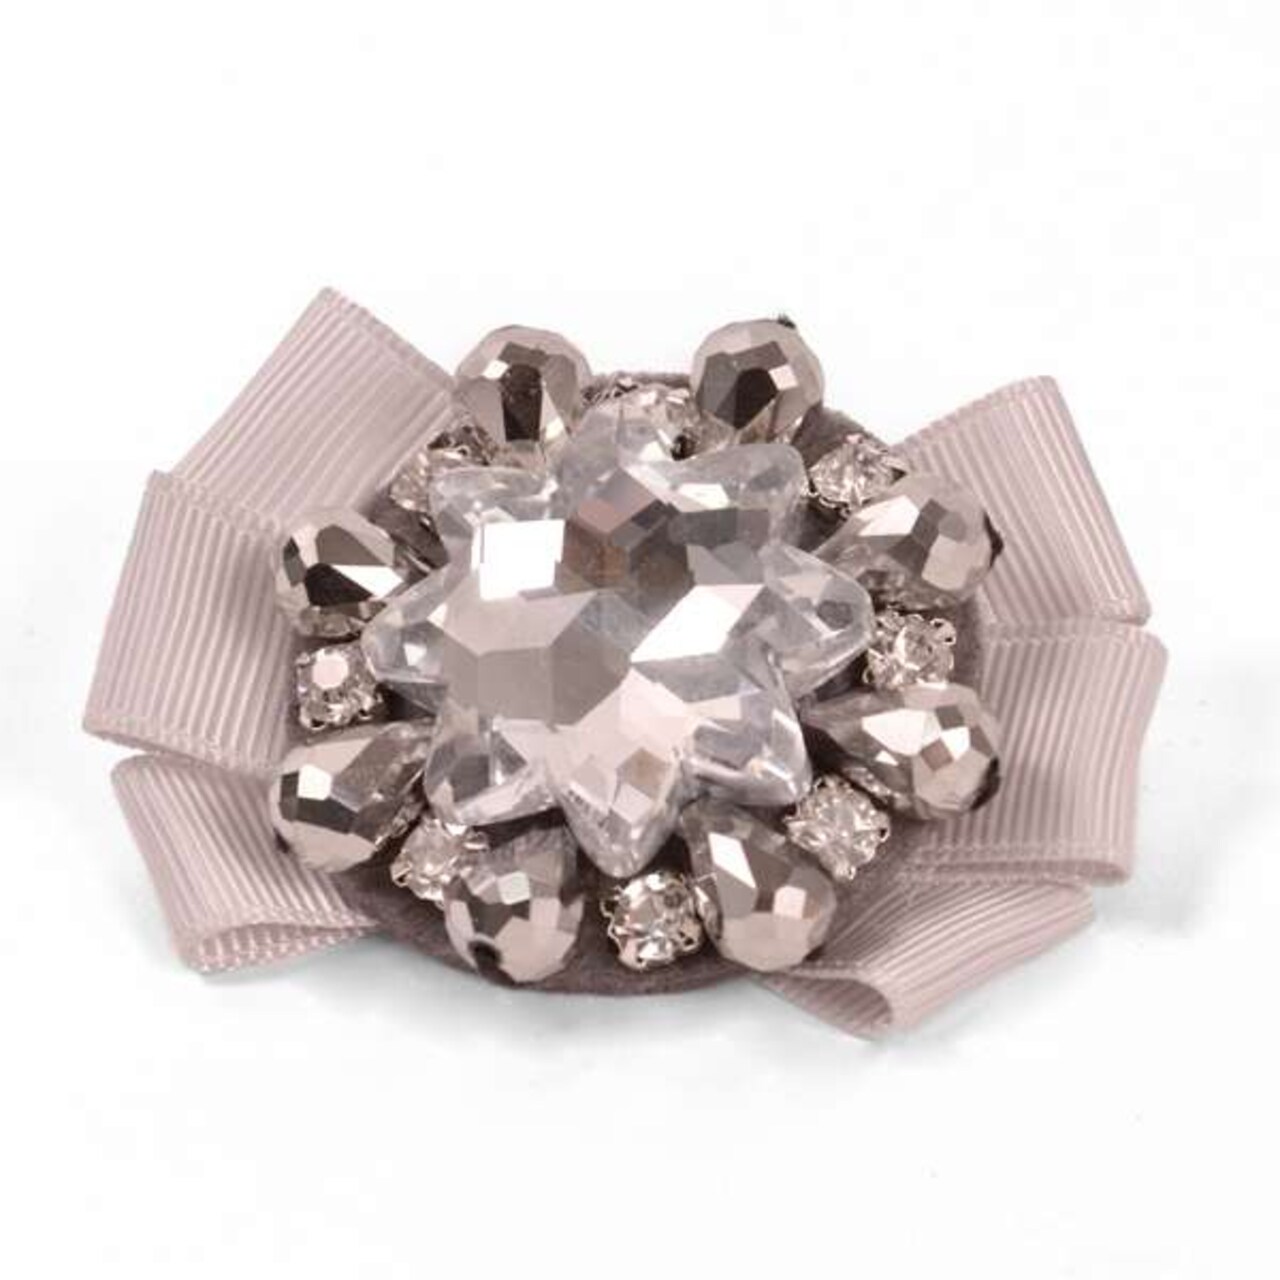 Bead and Gem Bow Brooch